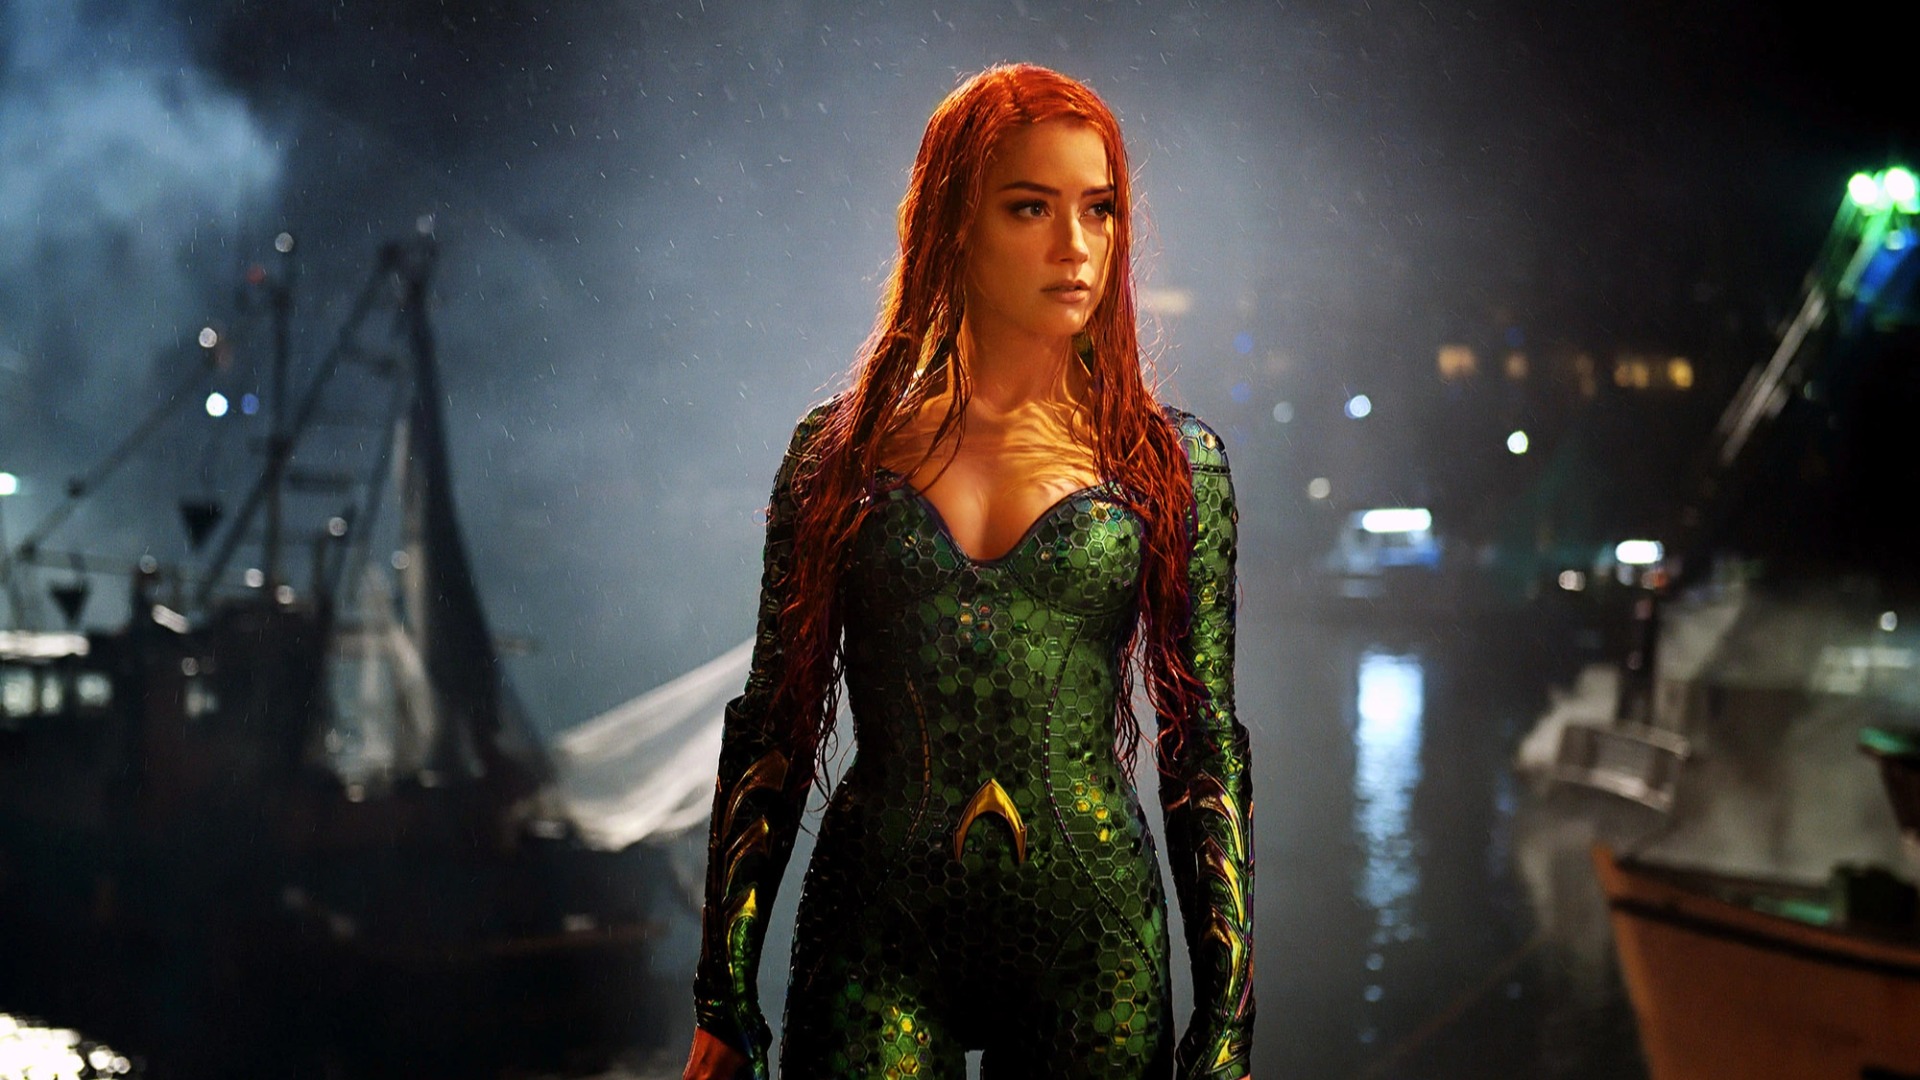 Amber Heard claims her Aquaman 2 role was reduced due to Johnny Depp allegations